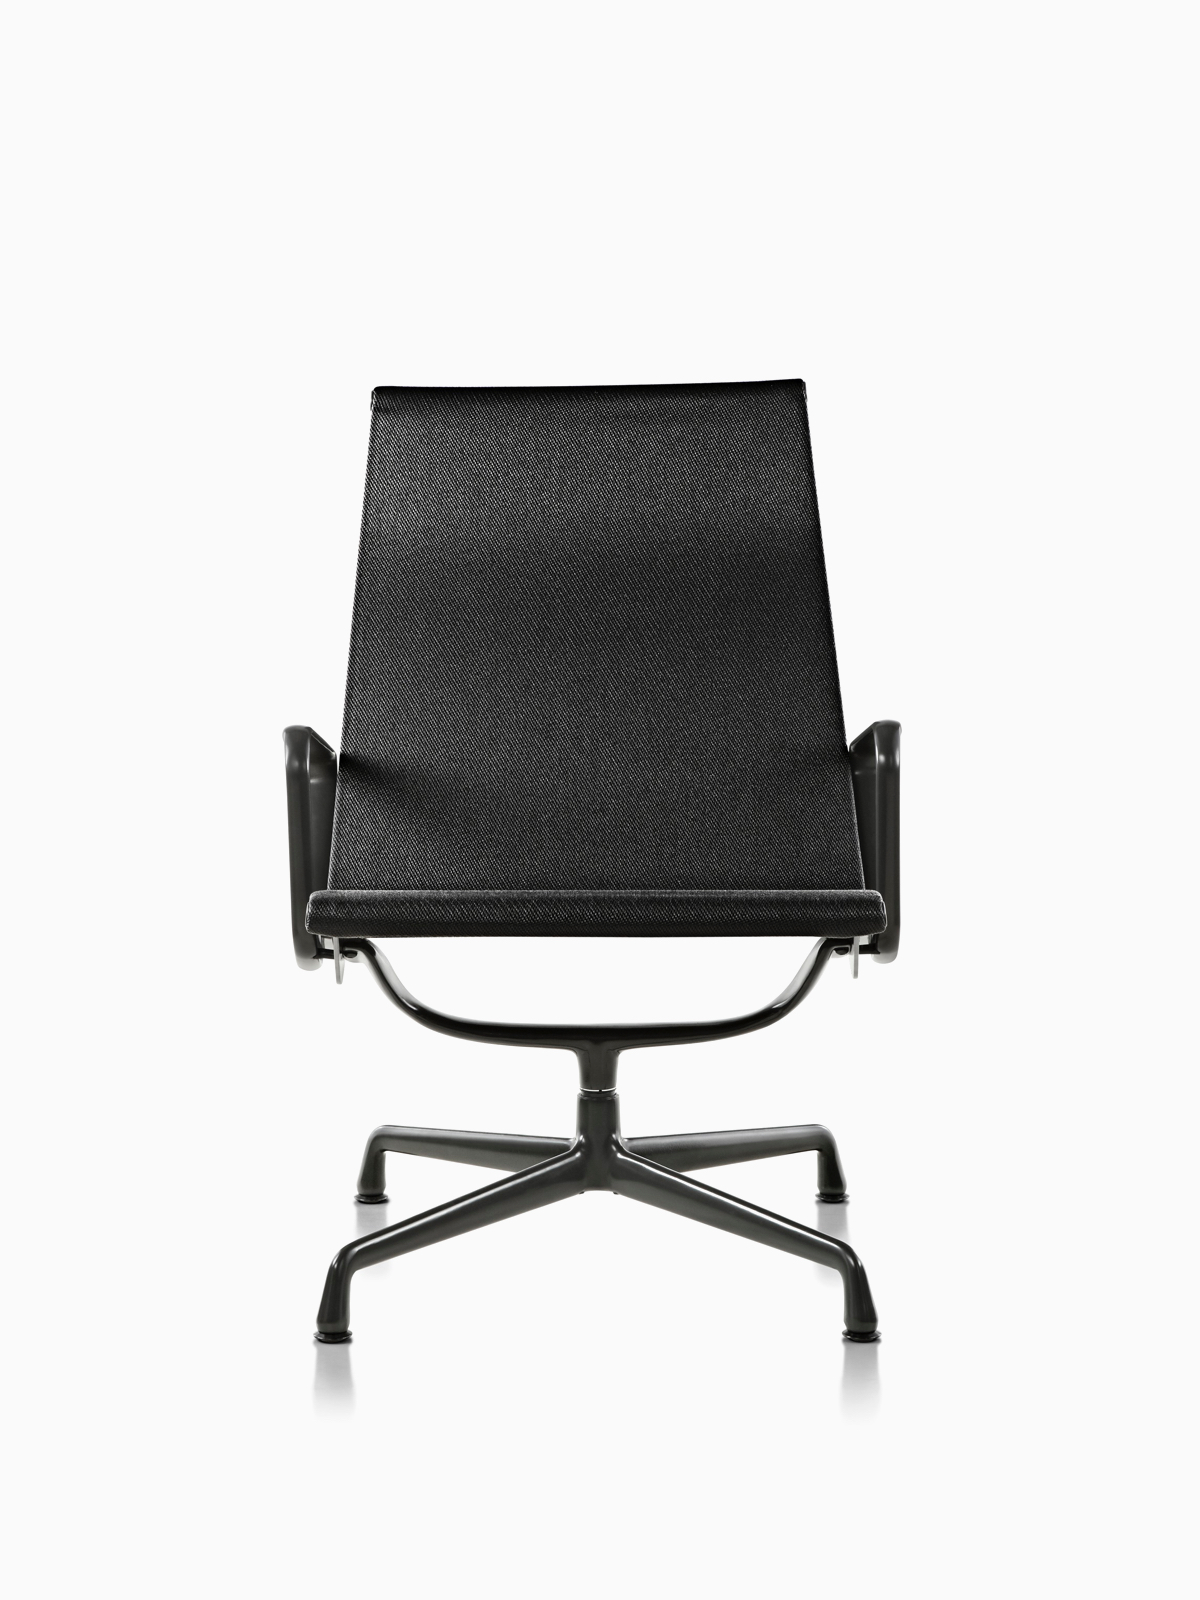 Eames Aluminium Group Chairs Outdoor